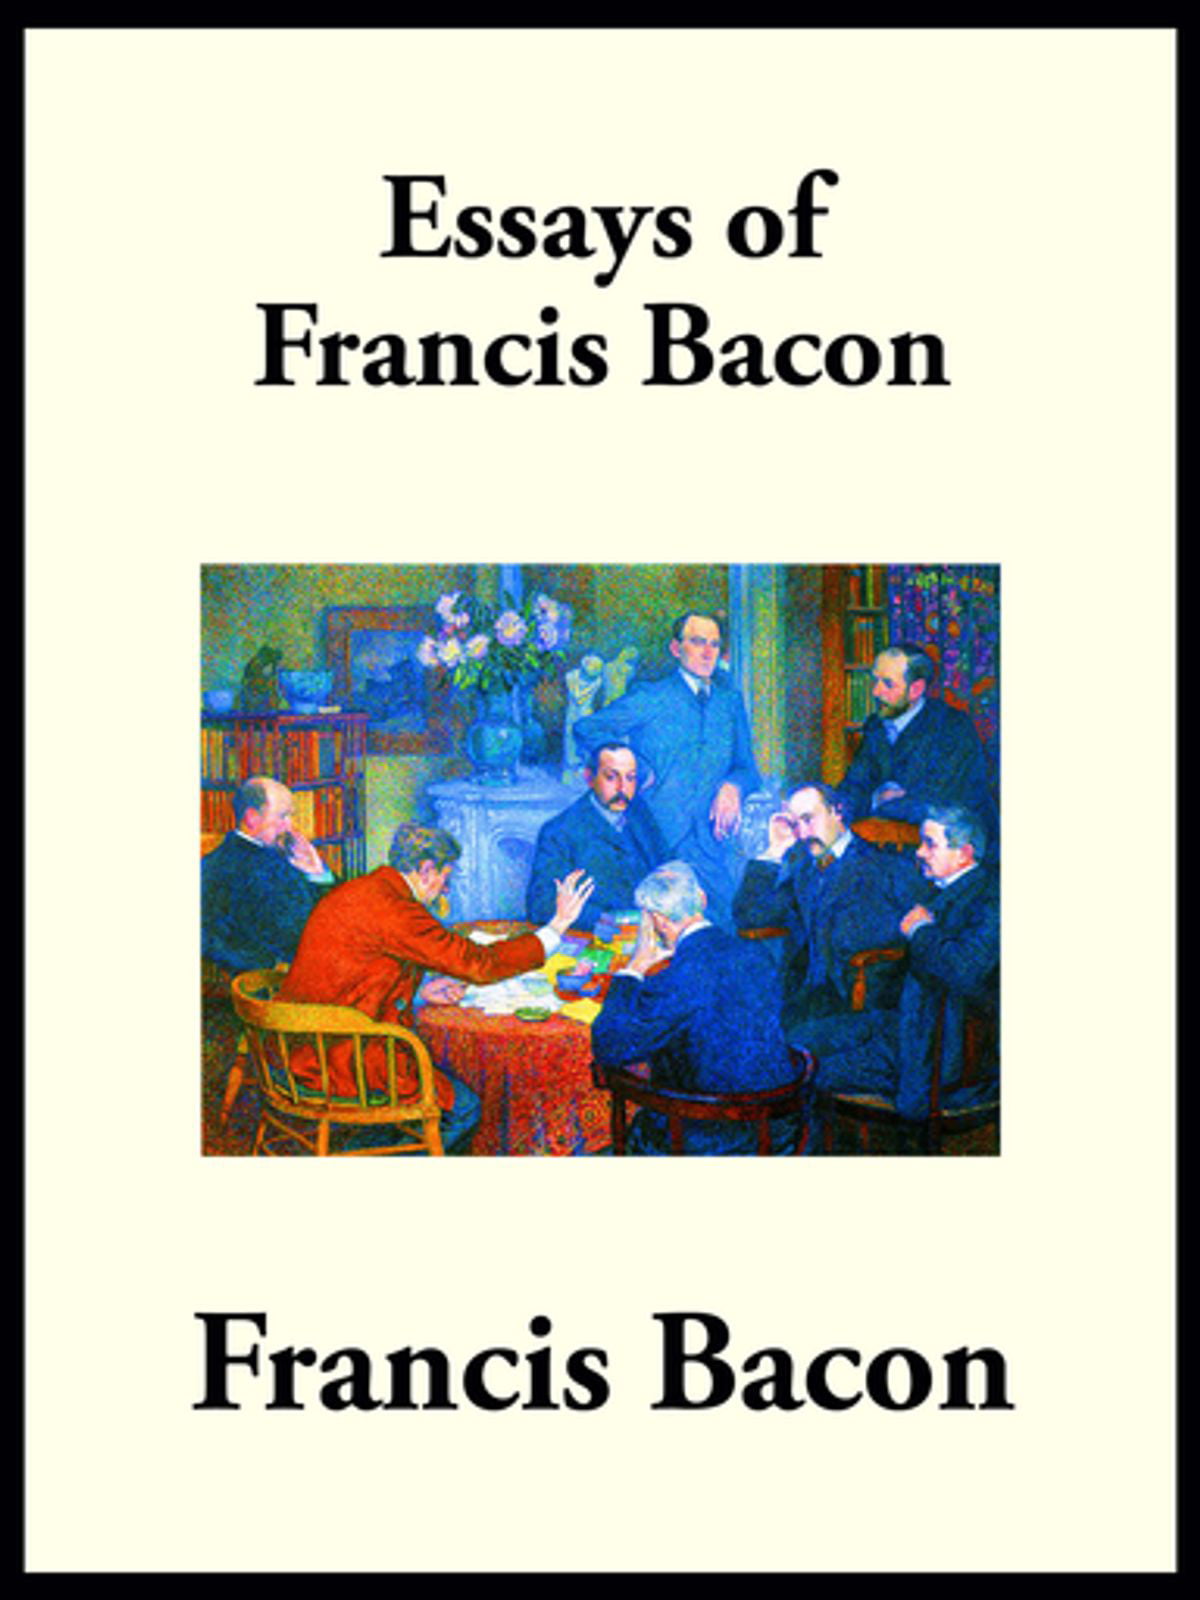 francis bacon selected essays